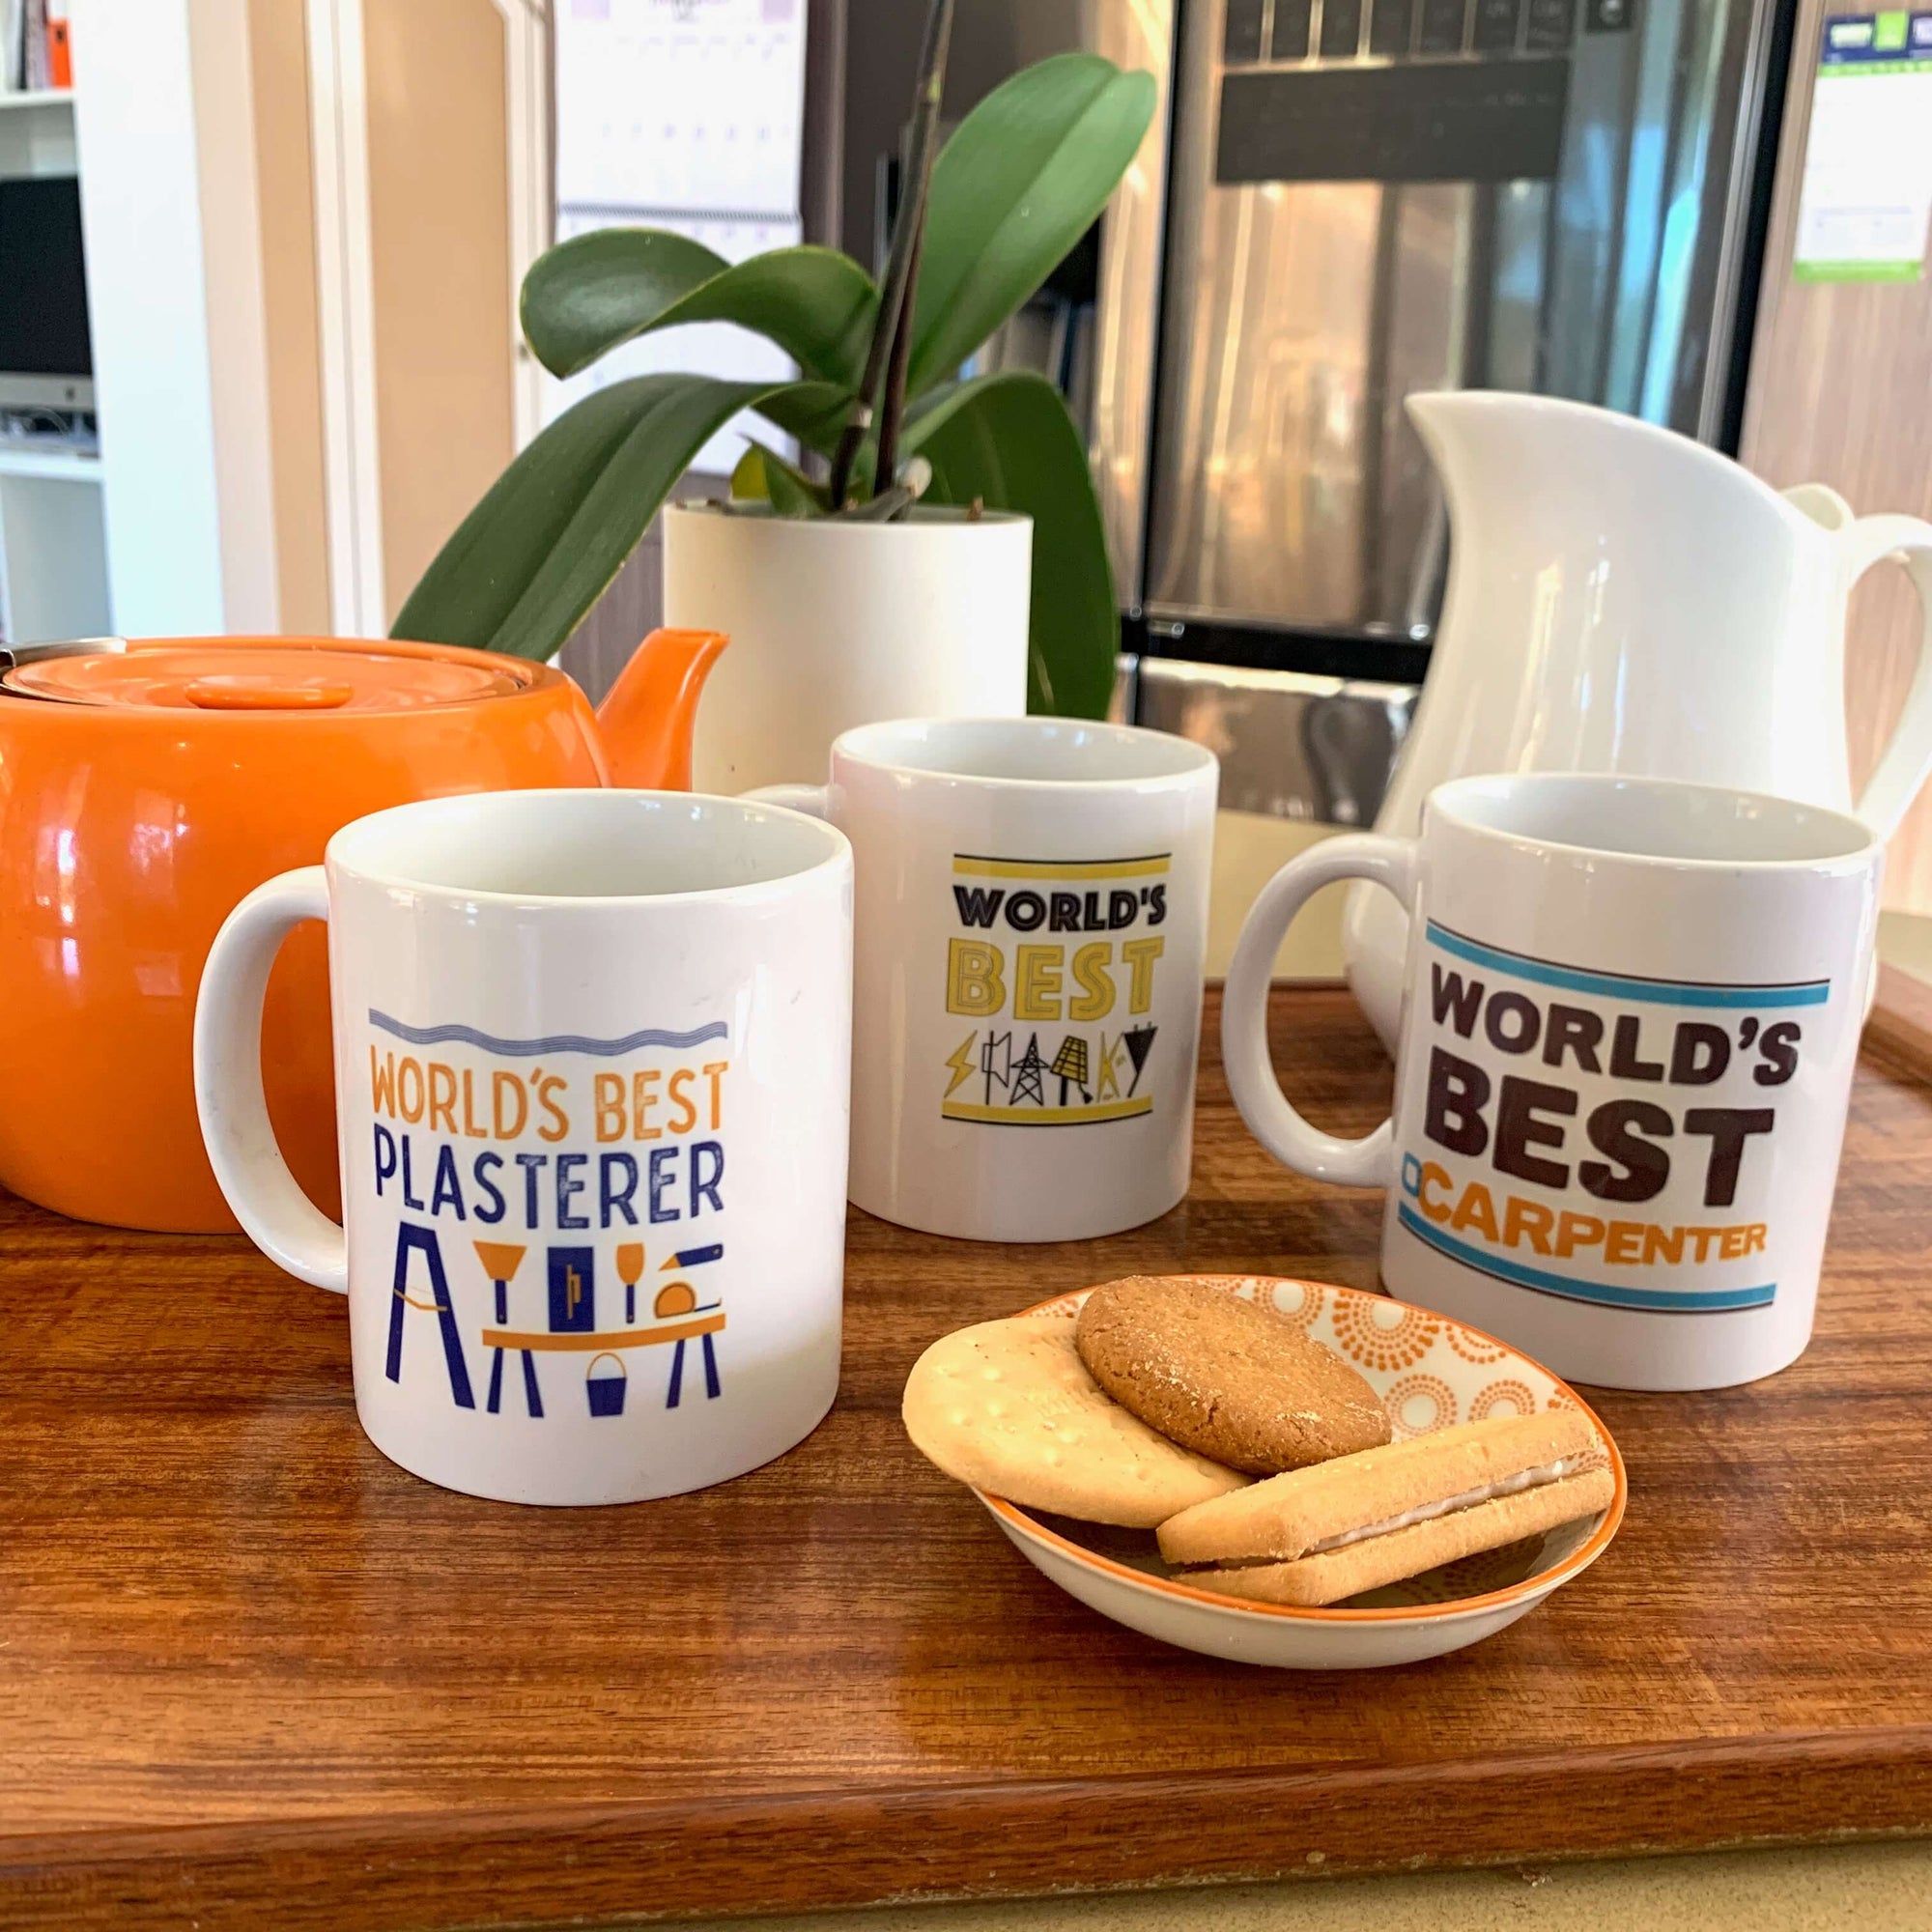 Exclusive Haluna Happy Names mug designs for the world's best plasterer, carpenter and sparky on a tray with orange teapot, white milk jug and of course a few biccies. Pot plant behind. Ready for a cuppa? These guys deserve one.